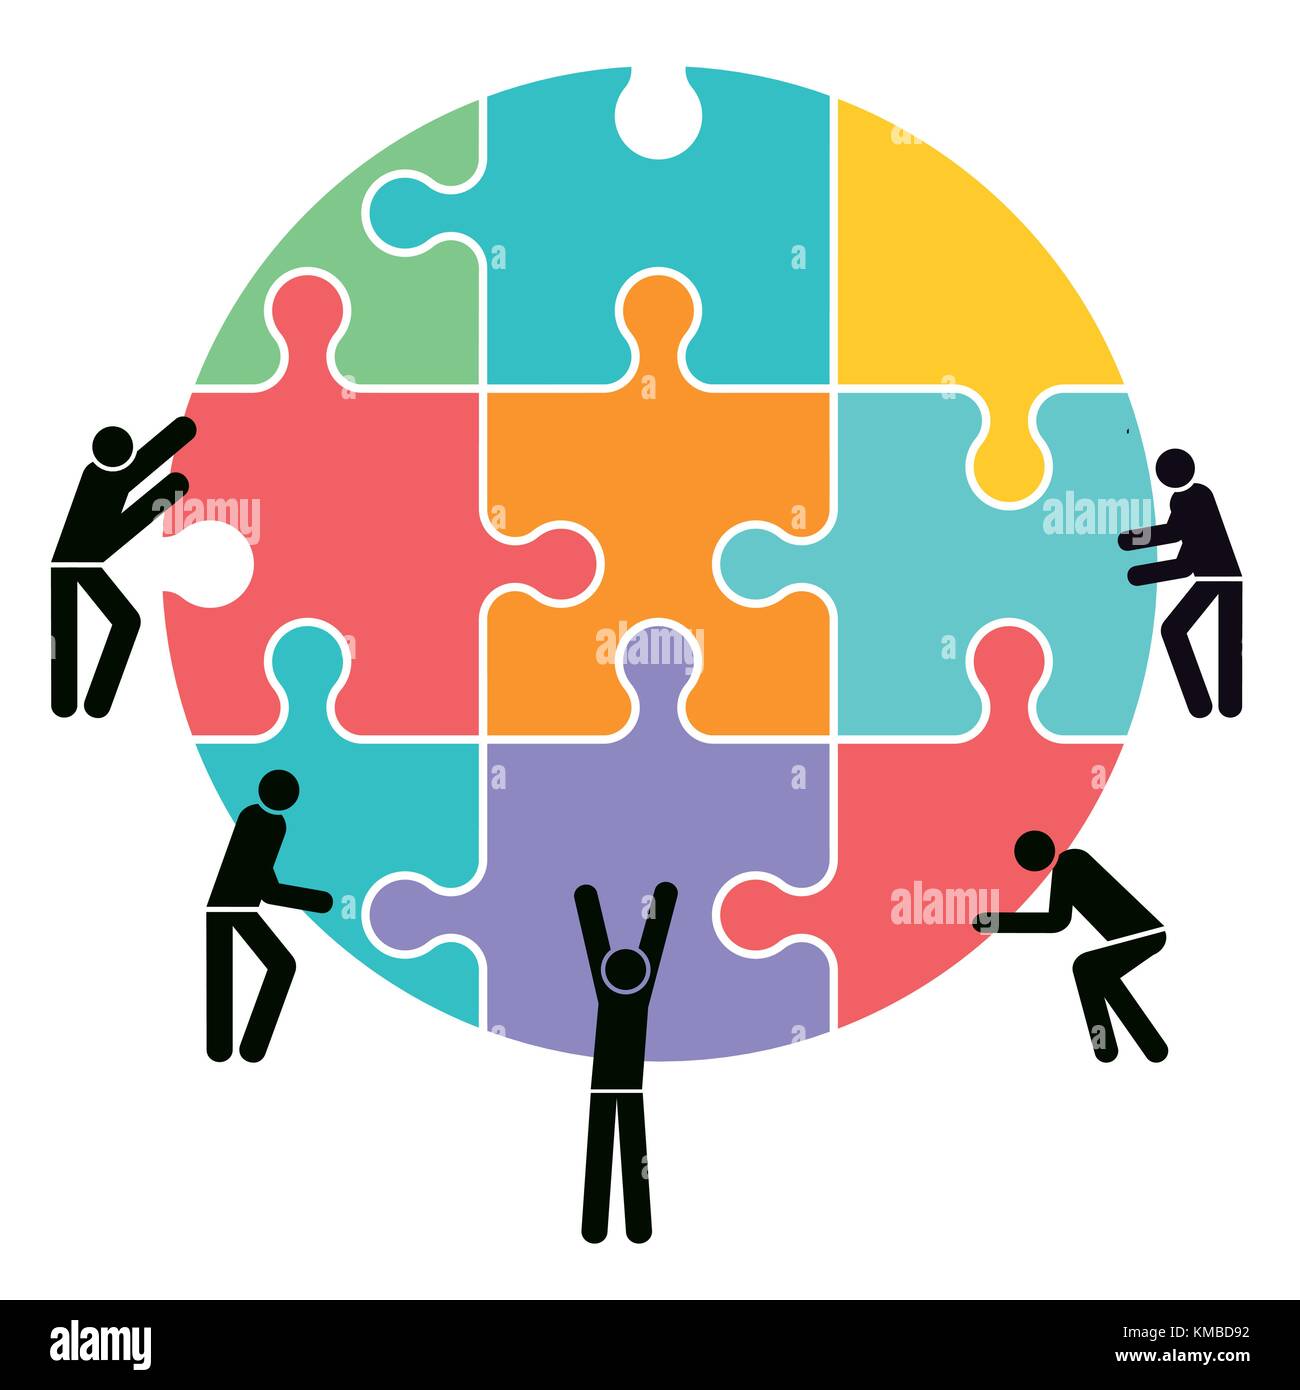 Team cooperation and connection, illustration Stock Vector